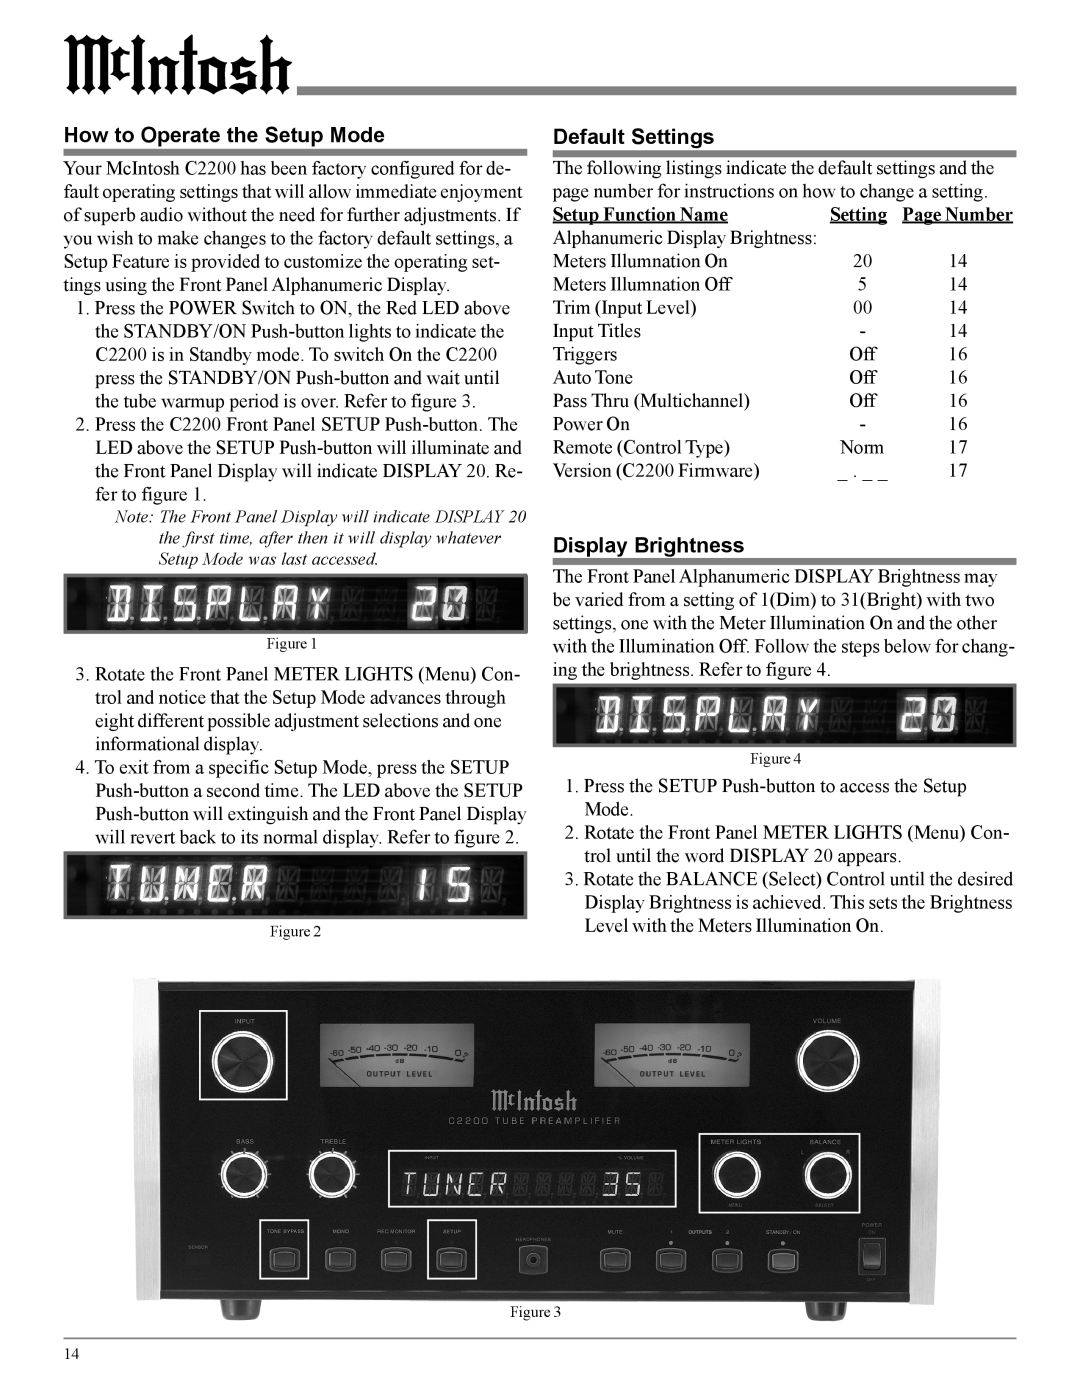 McIntosh C2200 owner manual How to Operate the Setup Mode, Default Settings, Display Brightness, Setup Function Name 